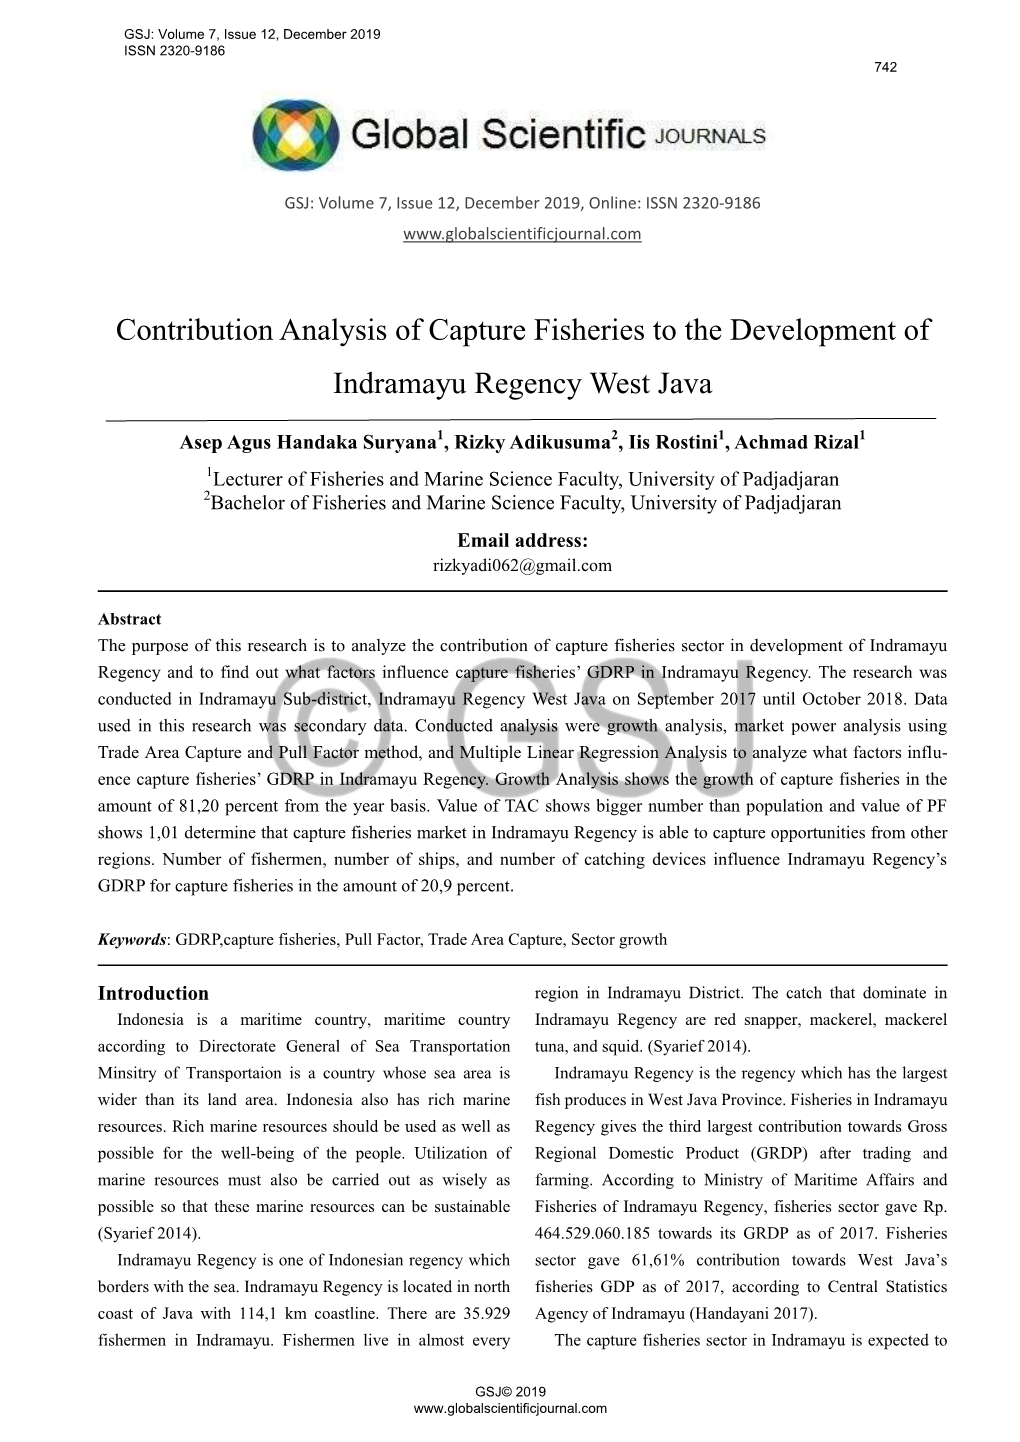 Contribution Analysis of Capture Fisheries to the Development of Indramayu Regency West Java